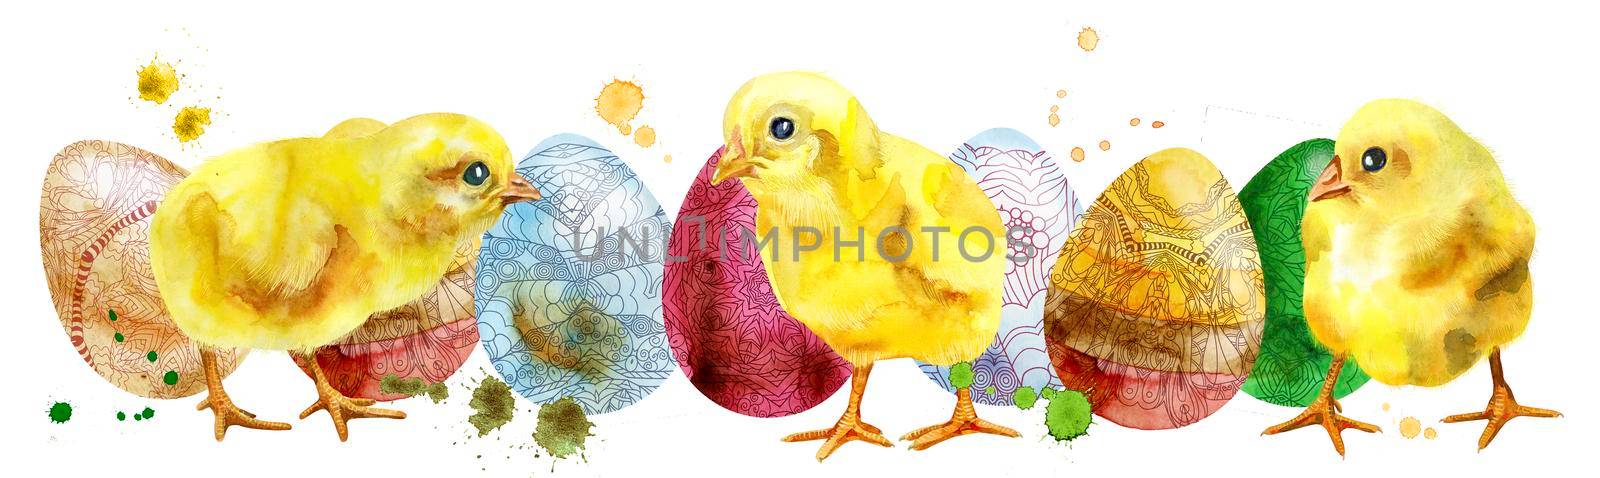 Watercolor Easter colored eggs and chickens on white background. Design element for greeting cards, note cards and invitations.